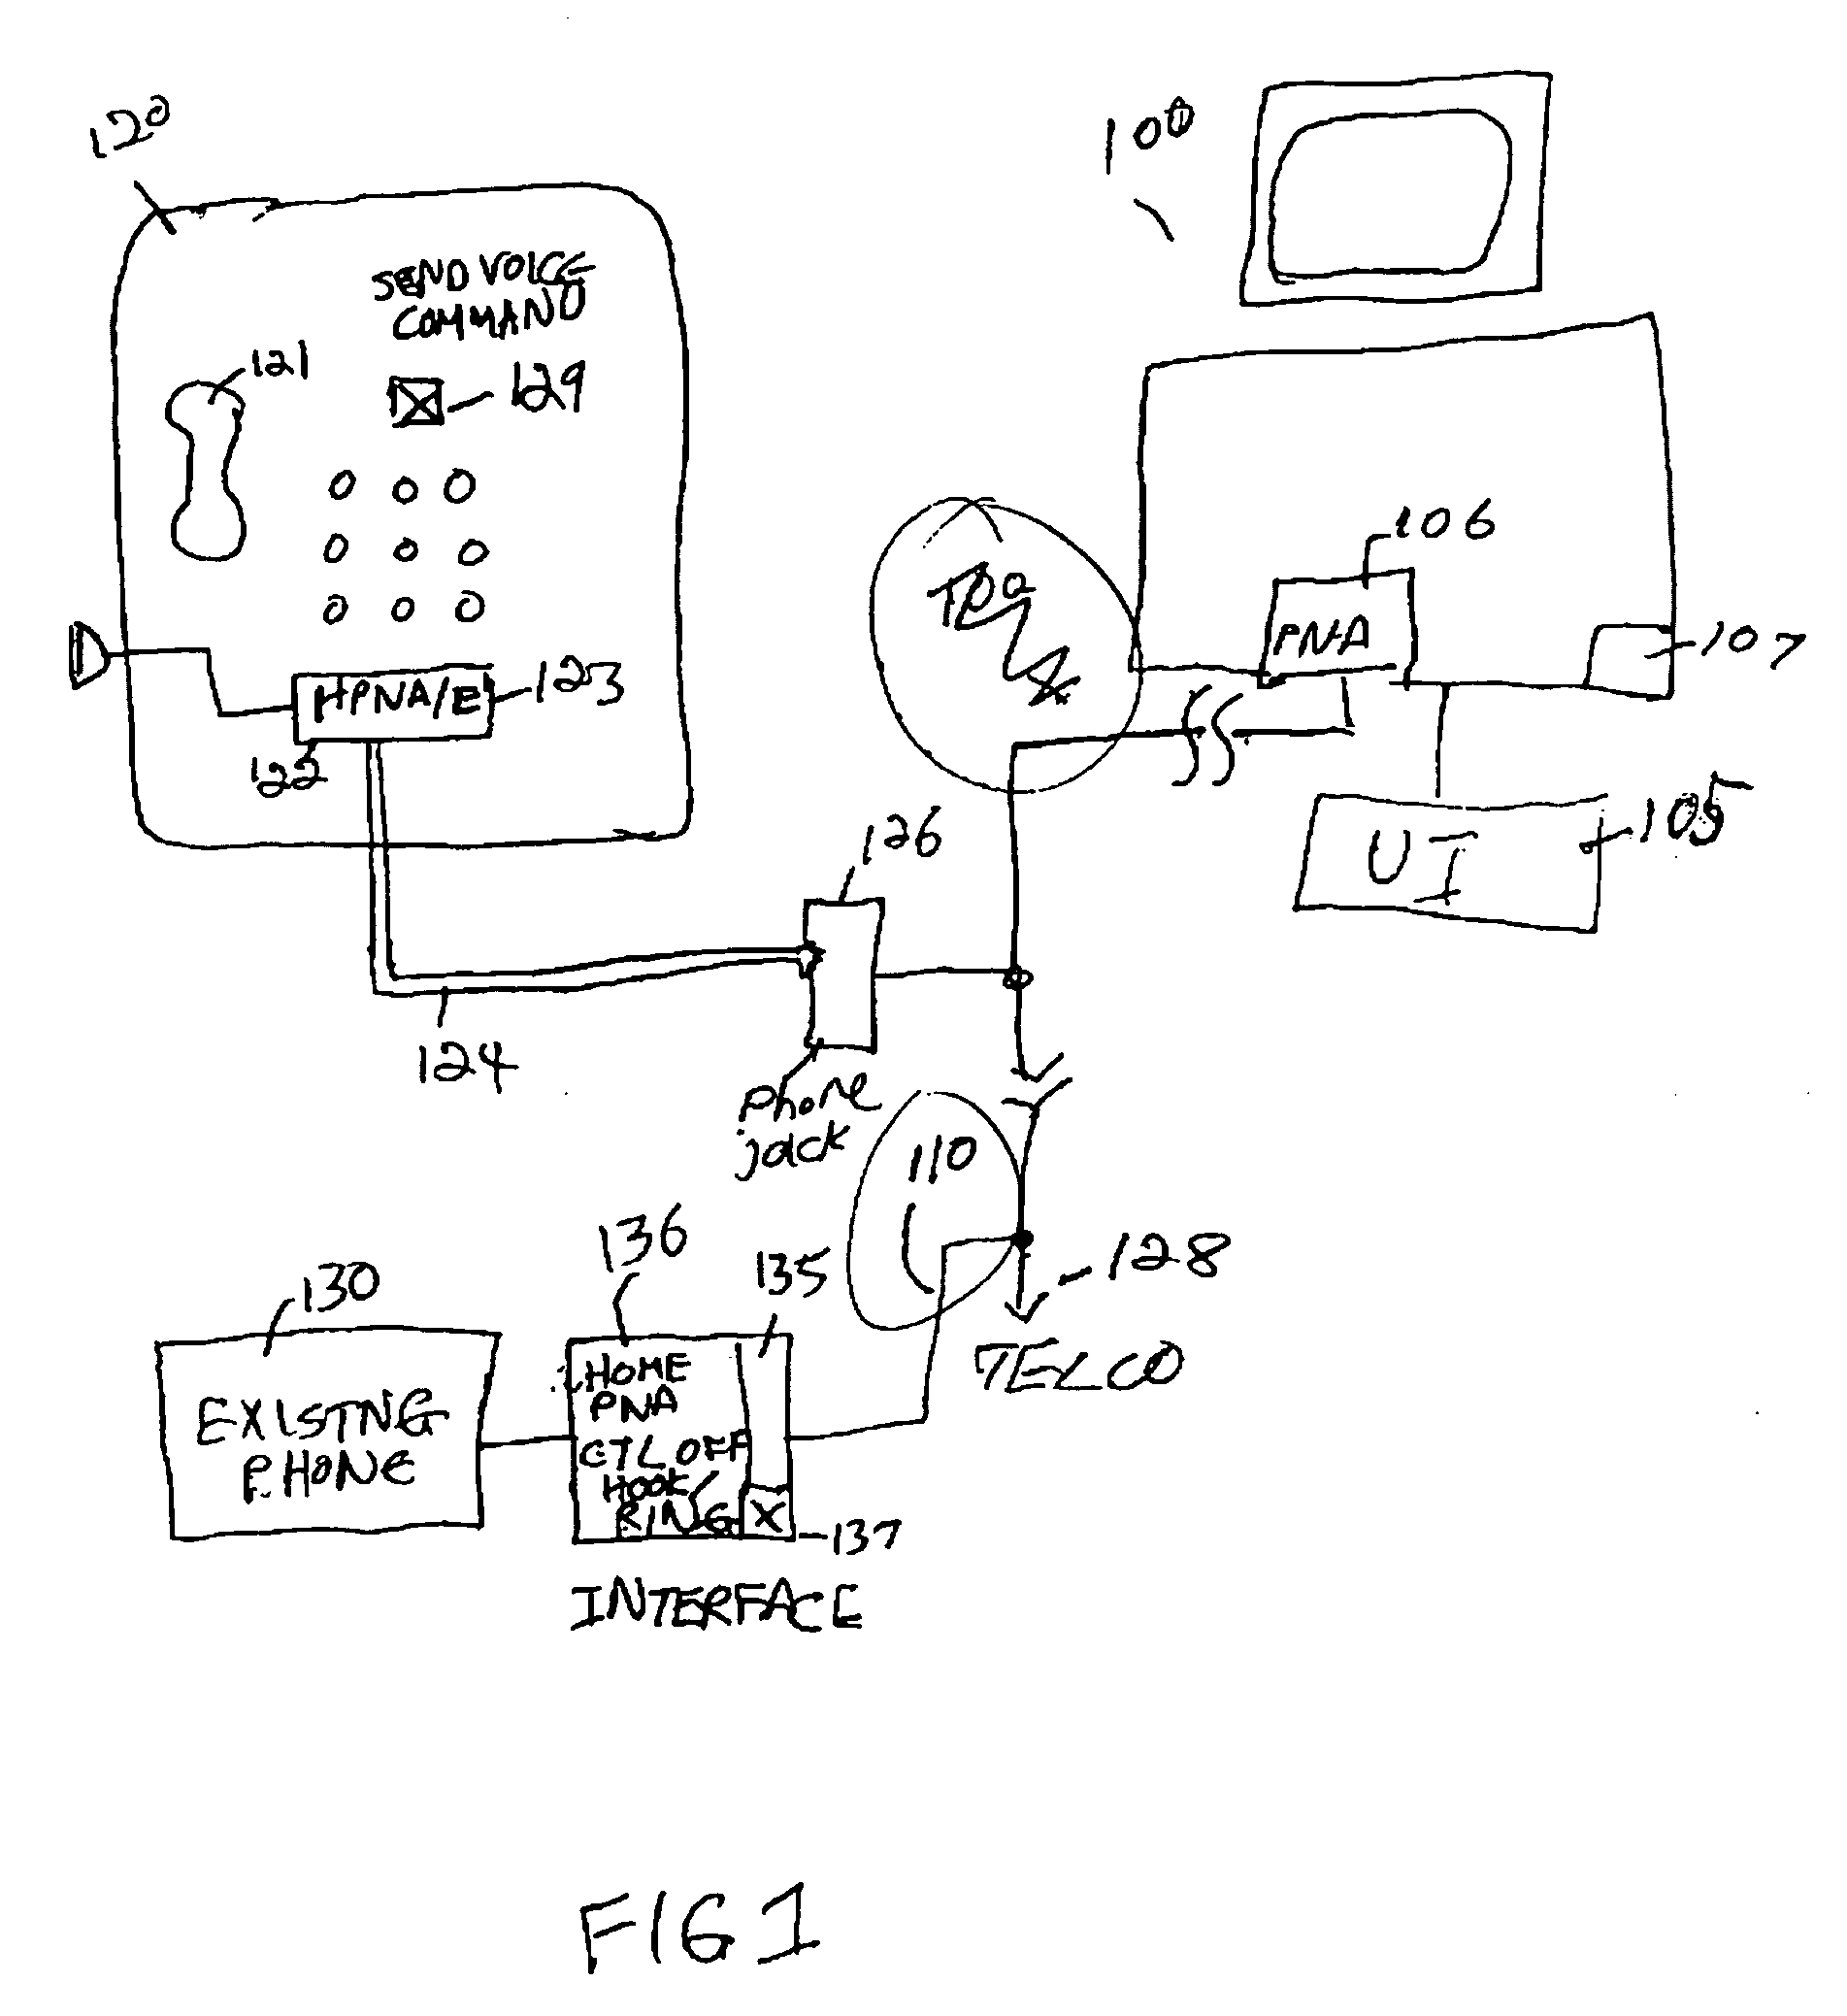 A telephone using a connection network for processing data remotely from the telephone